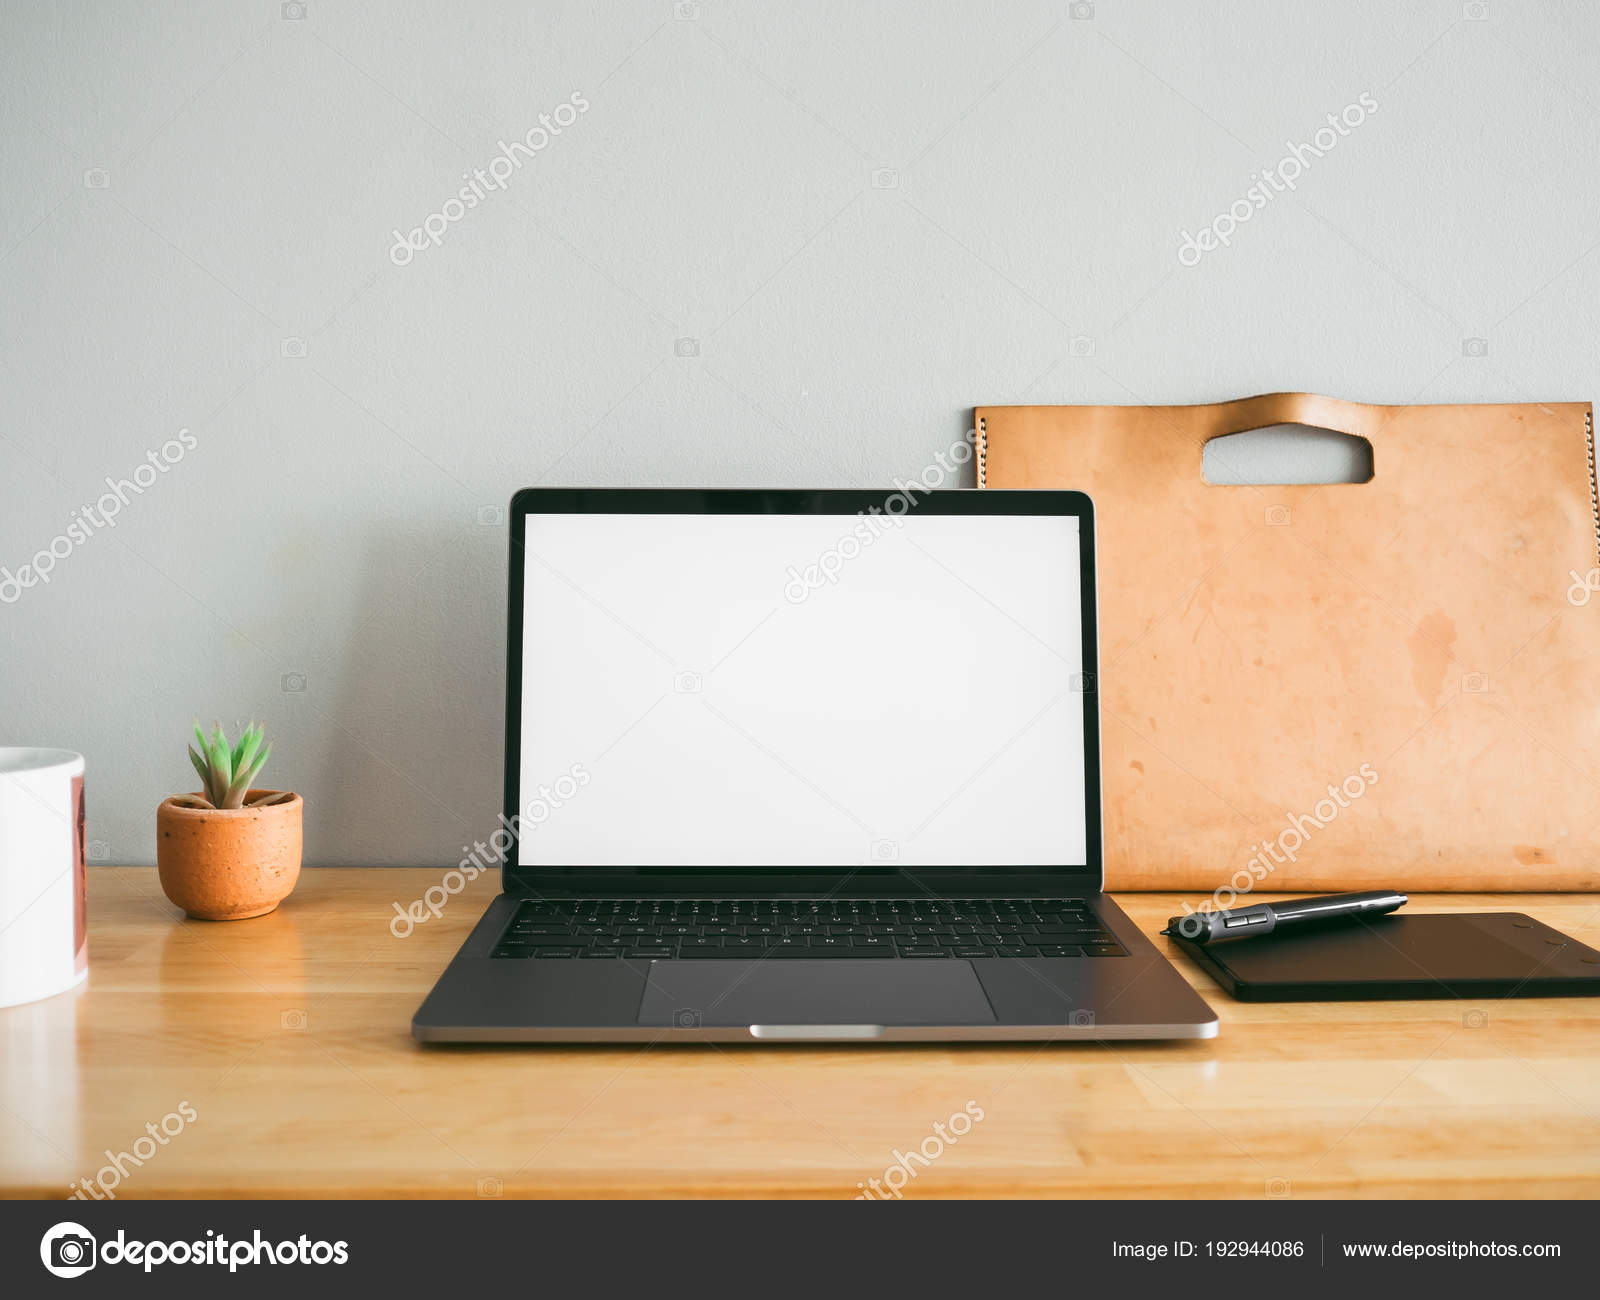 Laptop Some Stationary Items Wooden Work Desk Empty Gray Wall